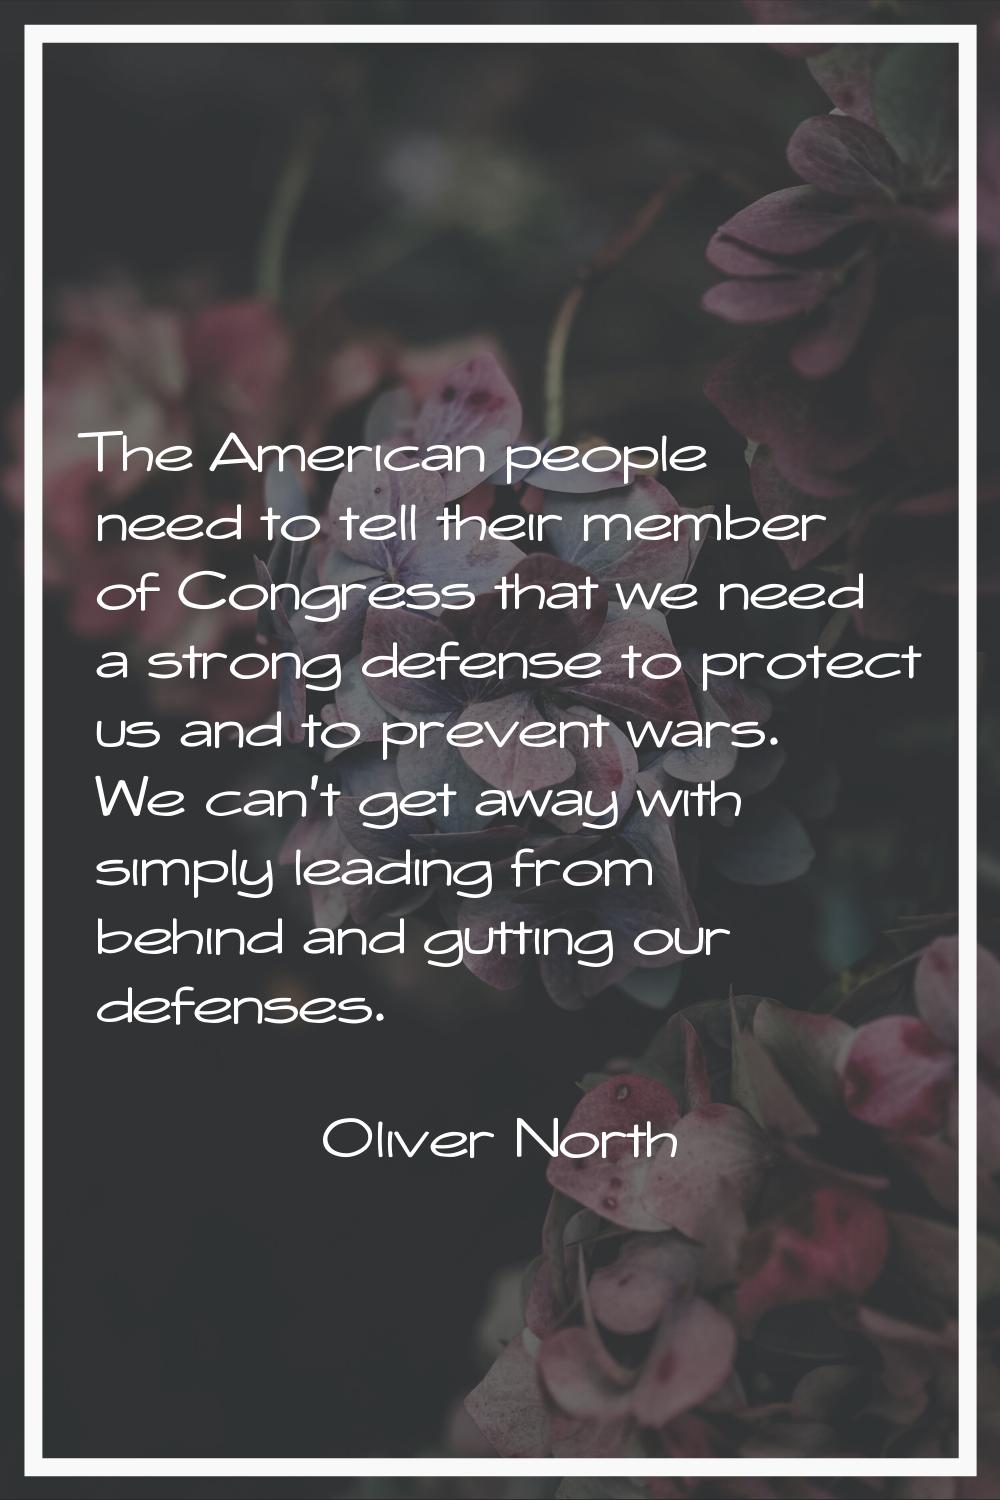 The American people need to tell their member of Congress that we need a strong defense to protect 